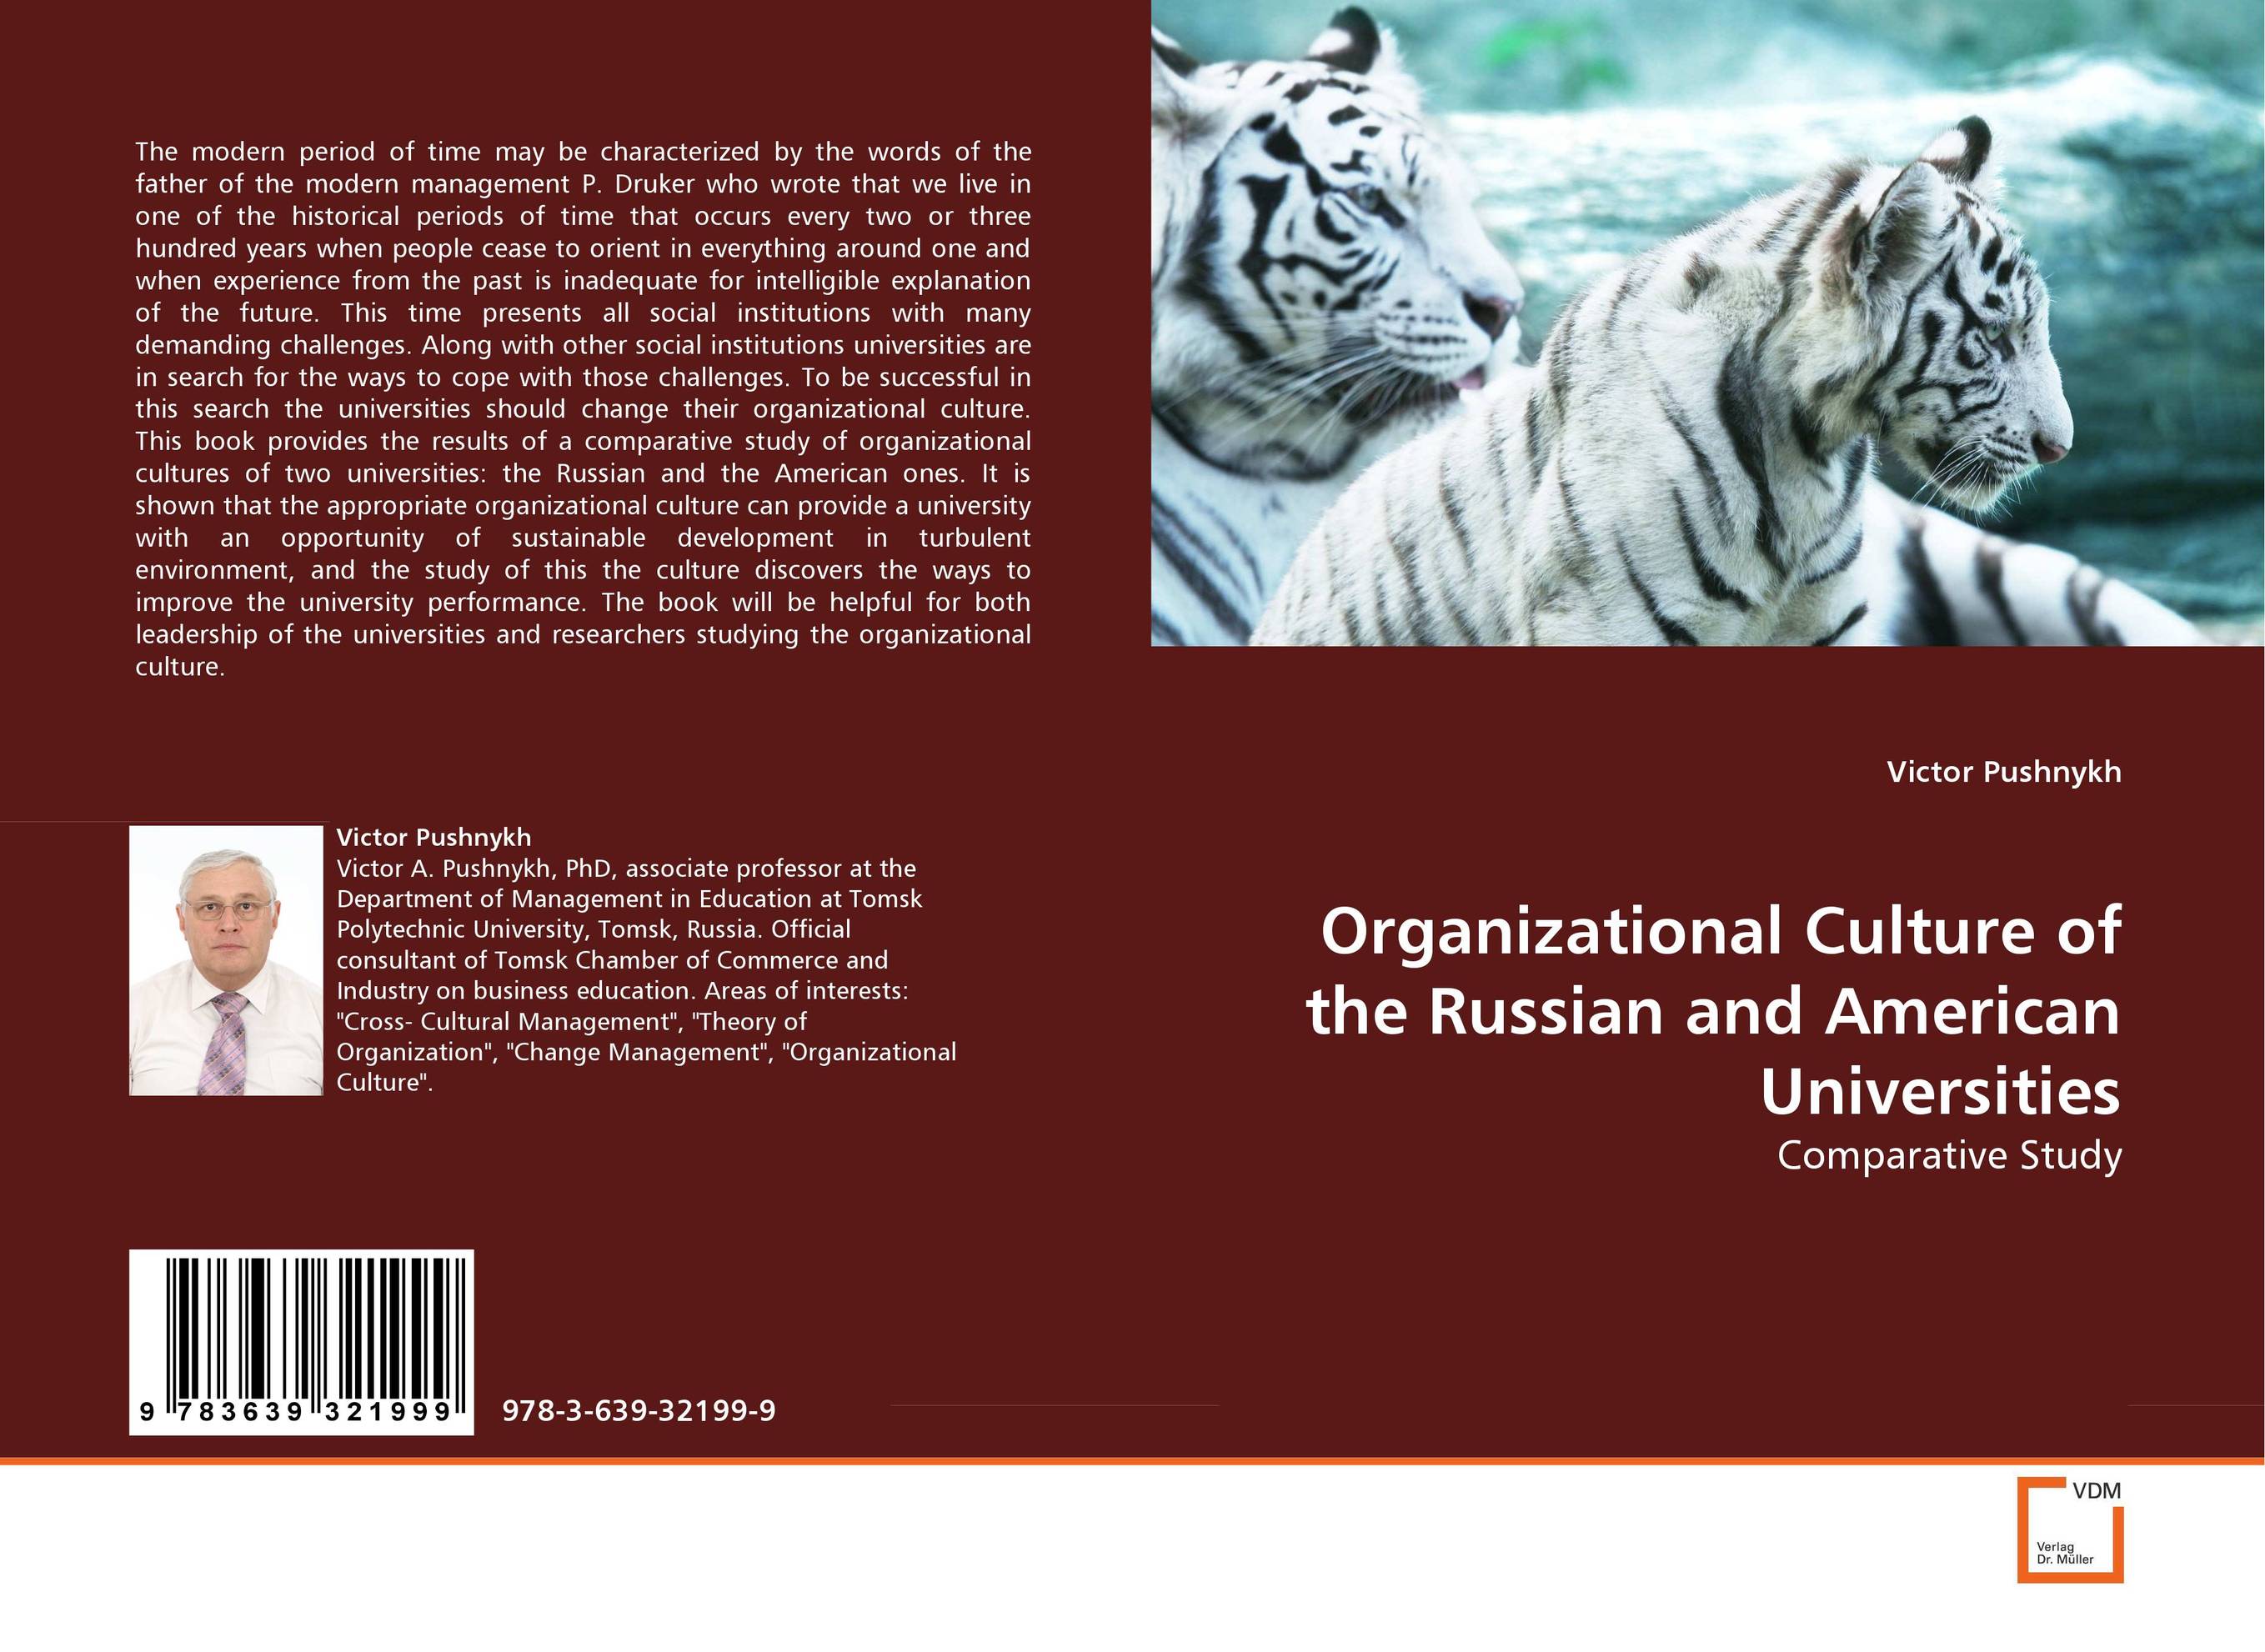 Organizational Culture of the Russian and American Universities